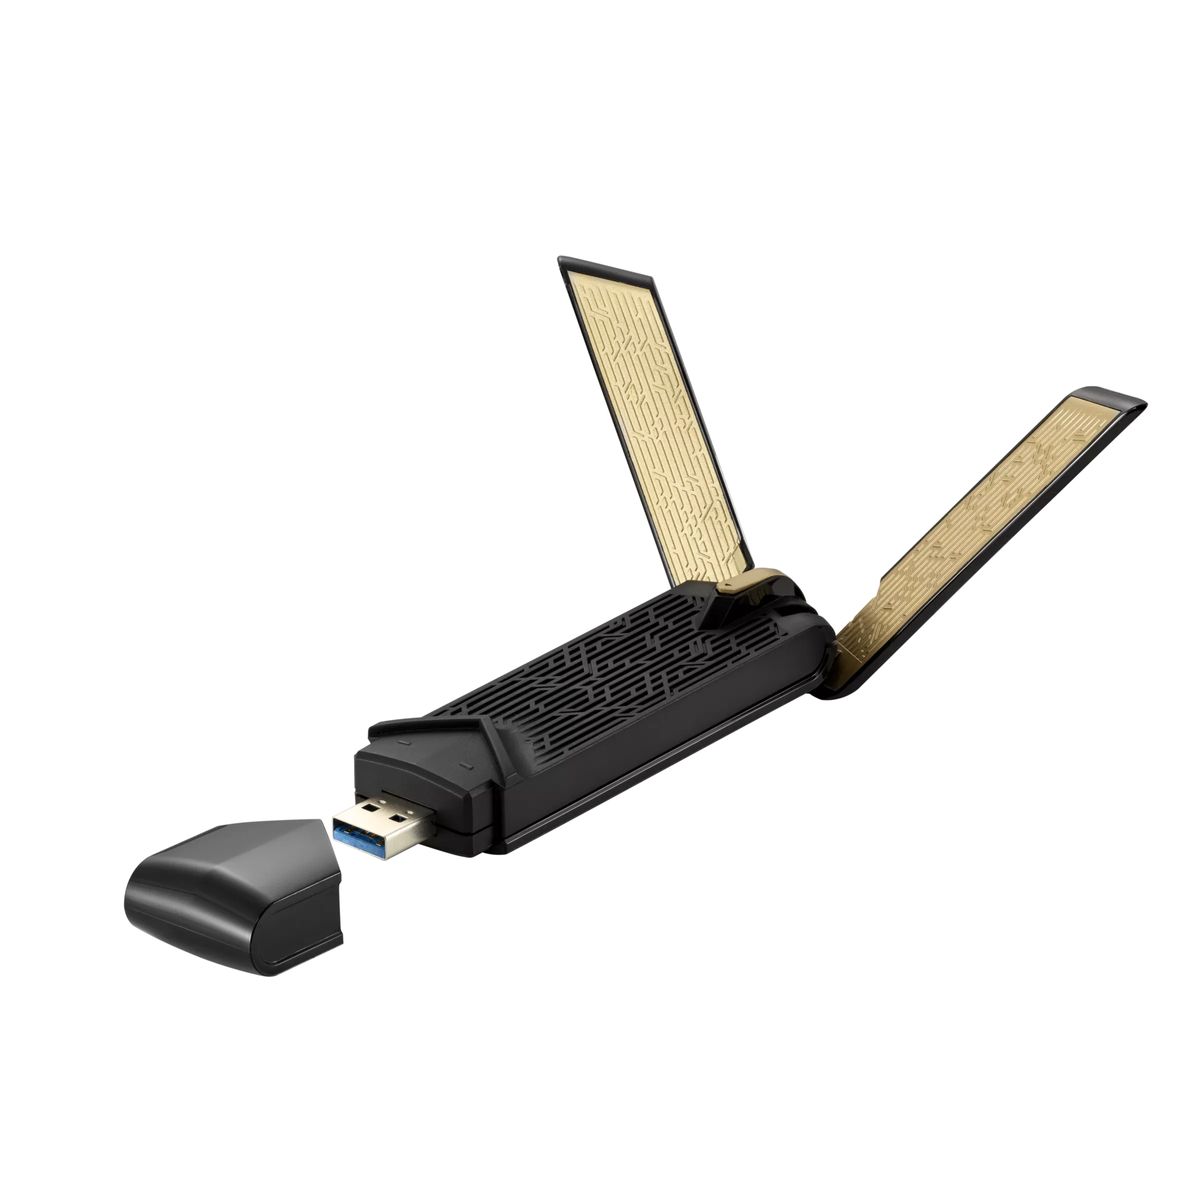 ASUS USB-AX56 Dual-Band AX1800 USB-WLAN-Adapter (WiFi 6, externe Antenne, WPA3-Security, Plug-and-Play)